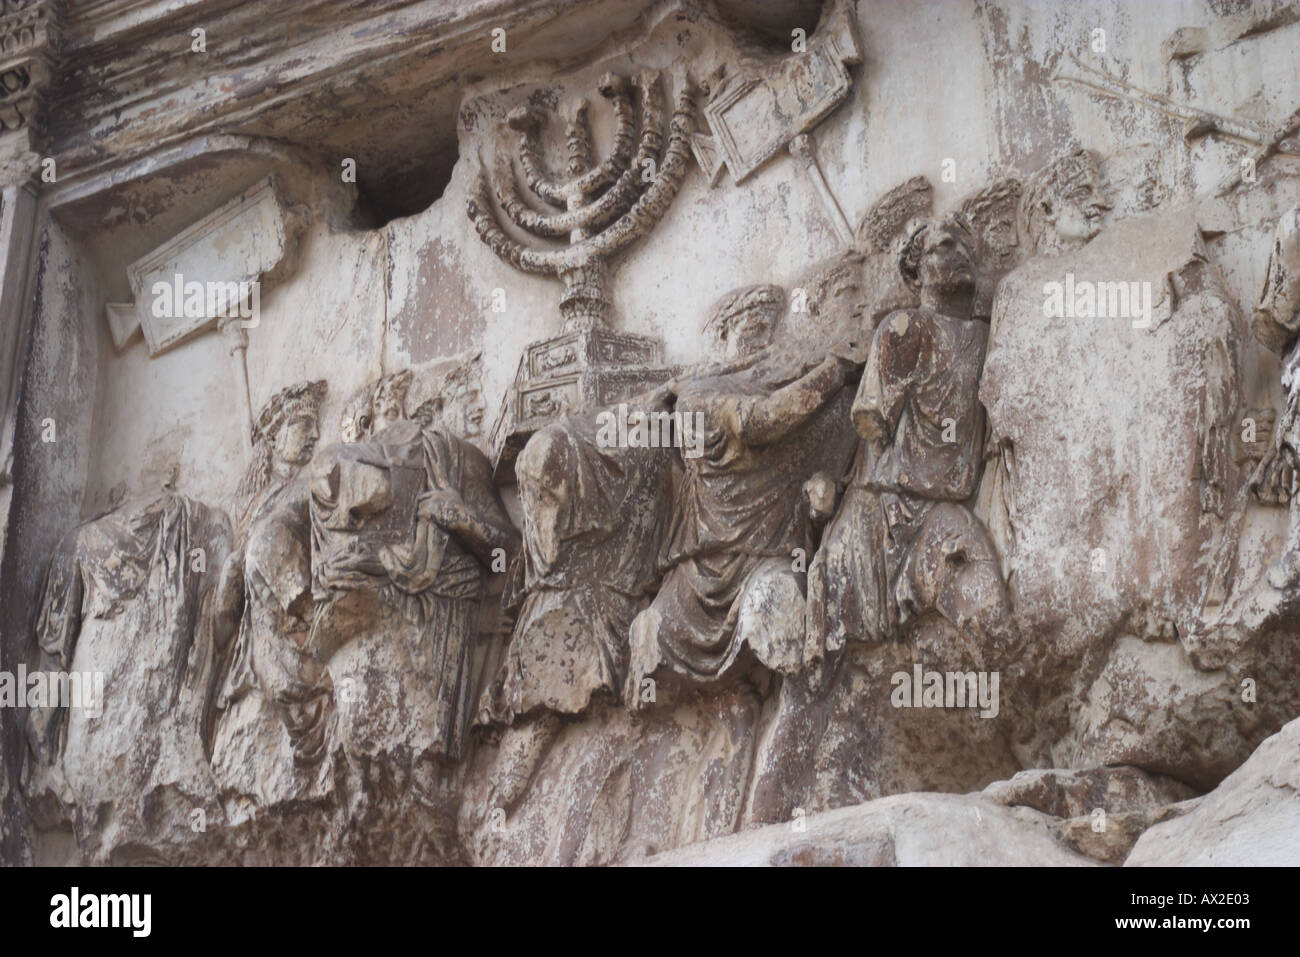 A section of the frieze from the Arco di Tito Arch of Titus at Foro Romano The Roman Forum Rome Stock Photo